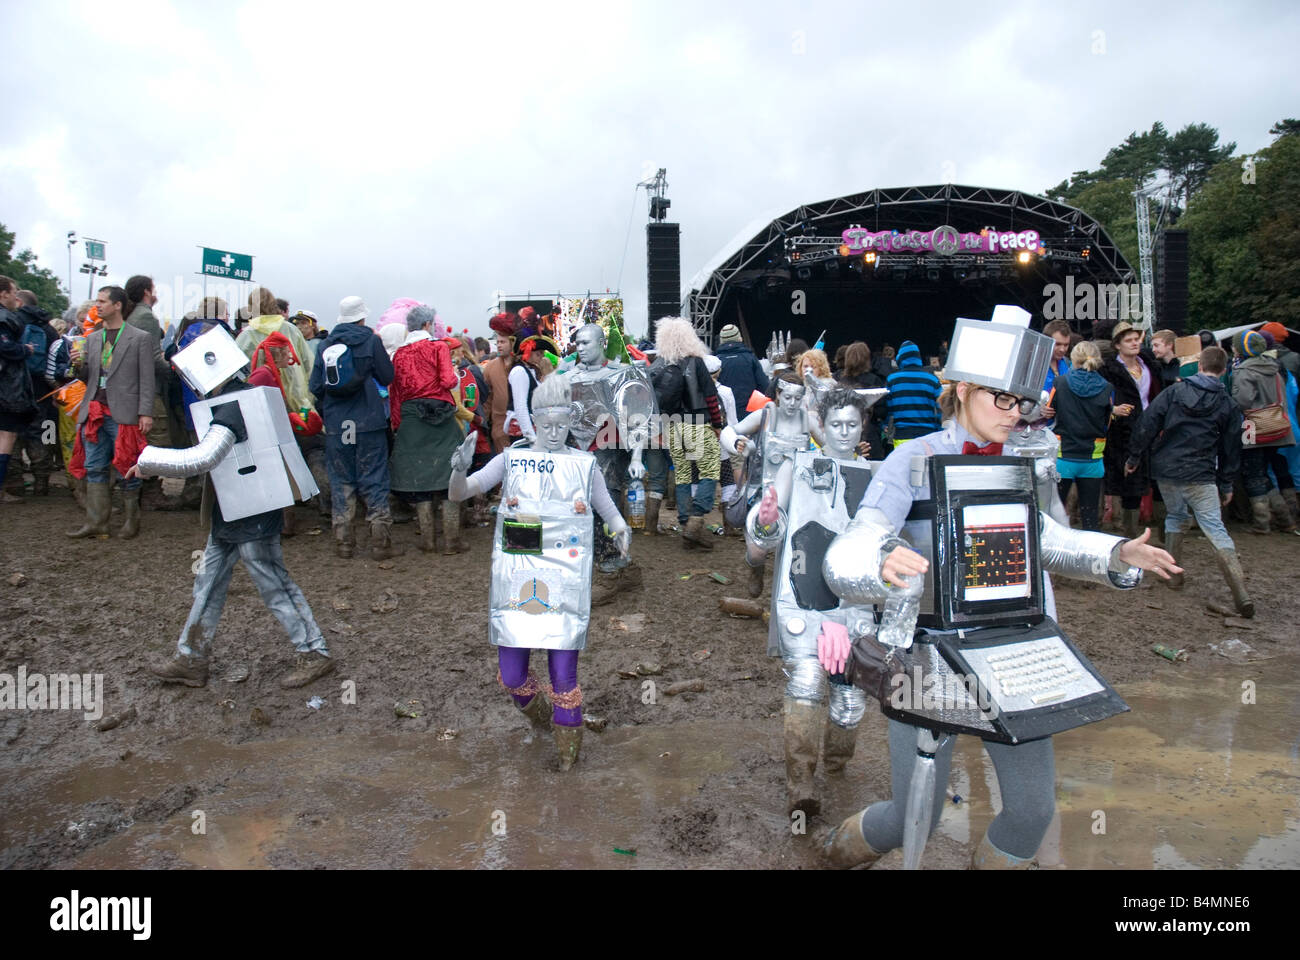 Group of people dressed up as a computers, walking in a mud, Bestival , Isle of wight UK 2008 Stock Photo